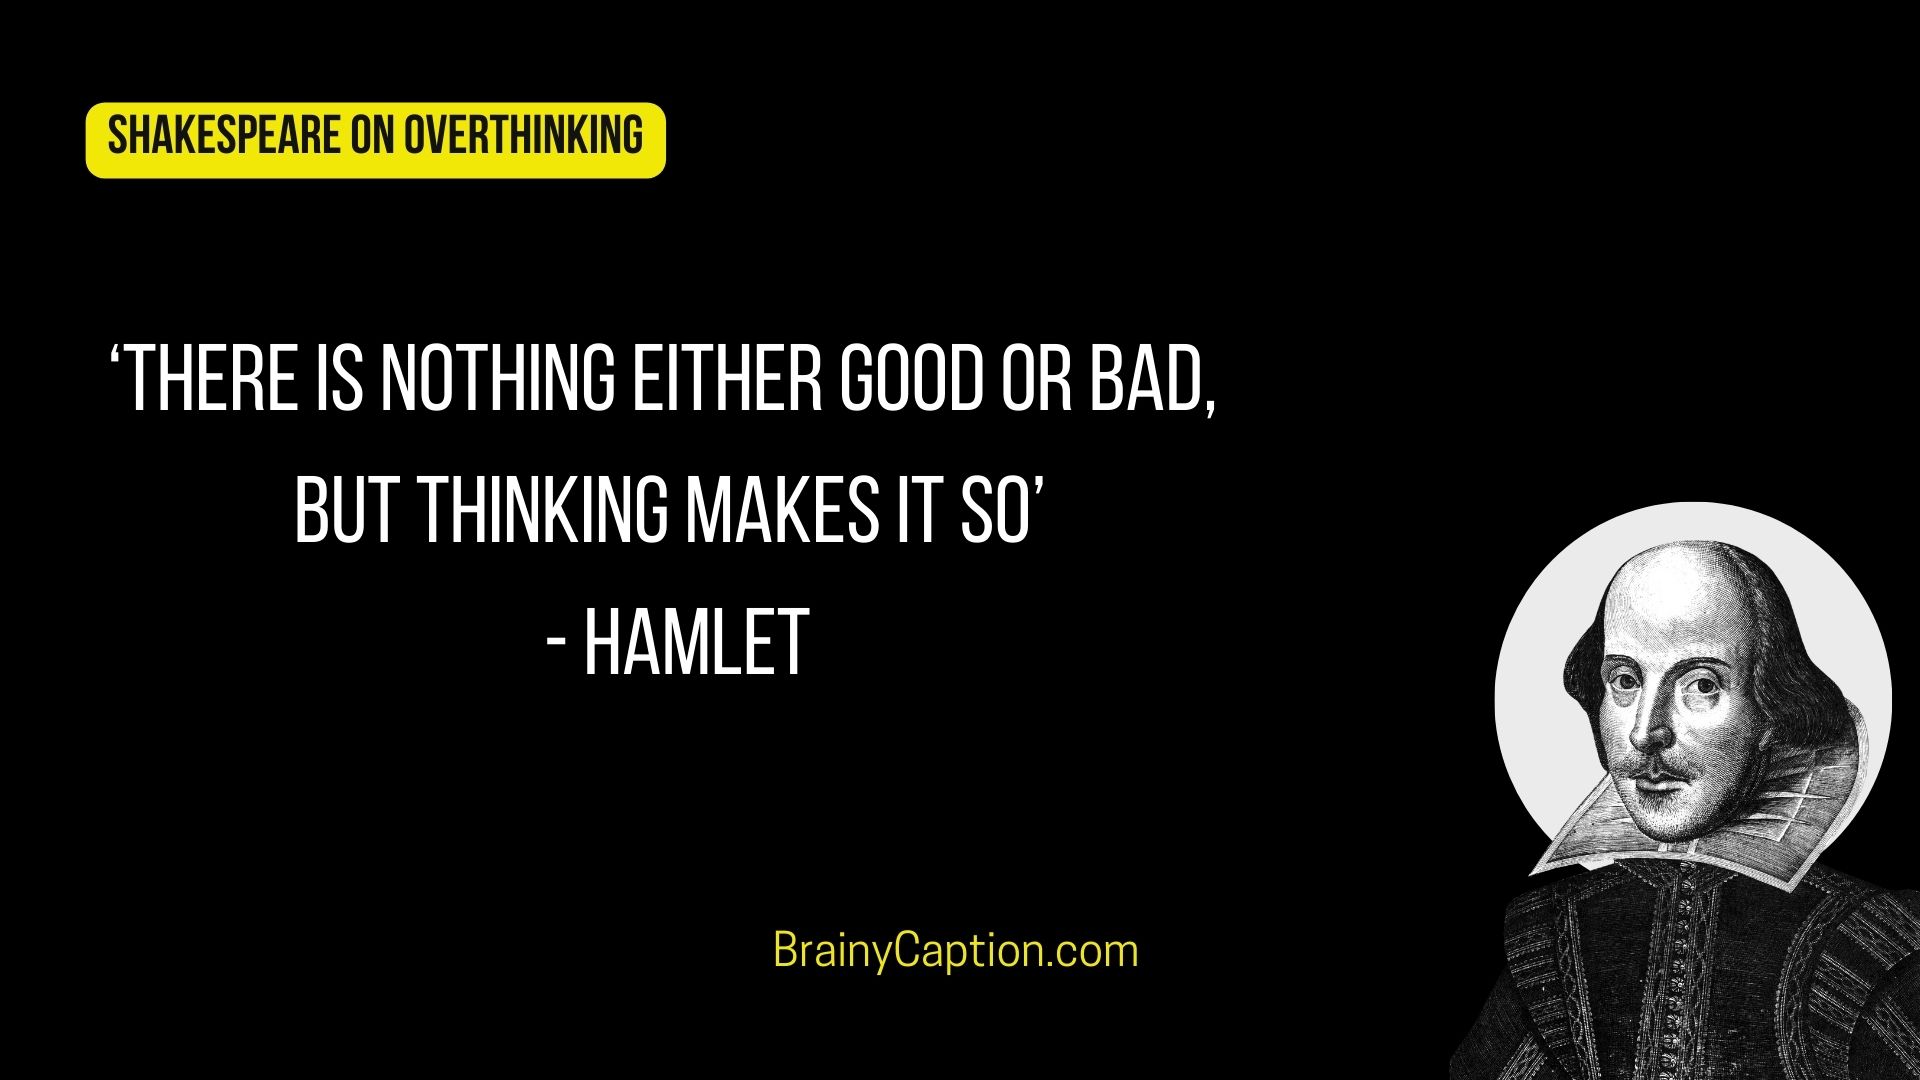 Shakespeare quotes on overthinking from Hamlet